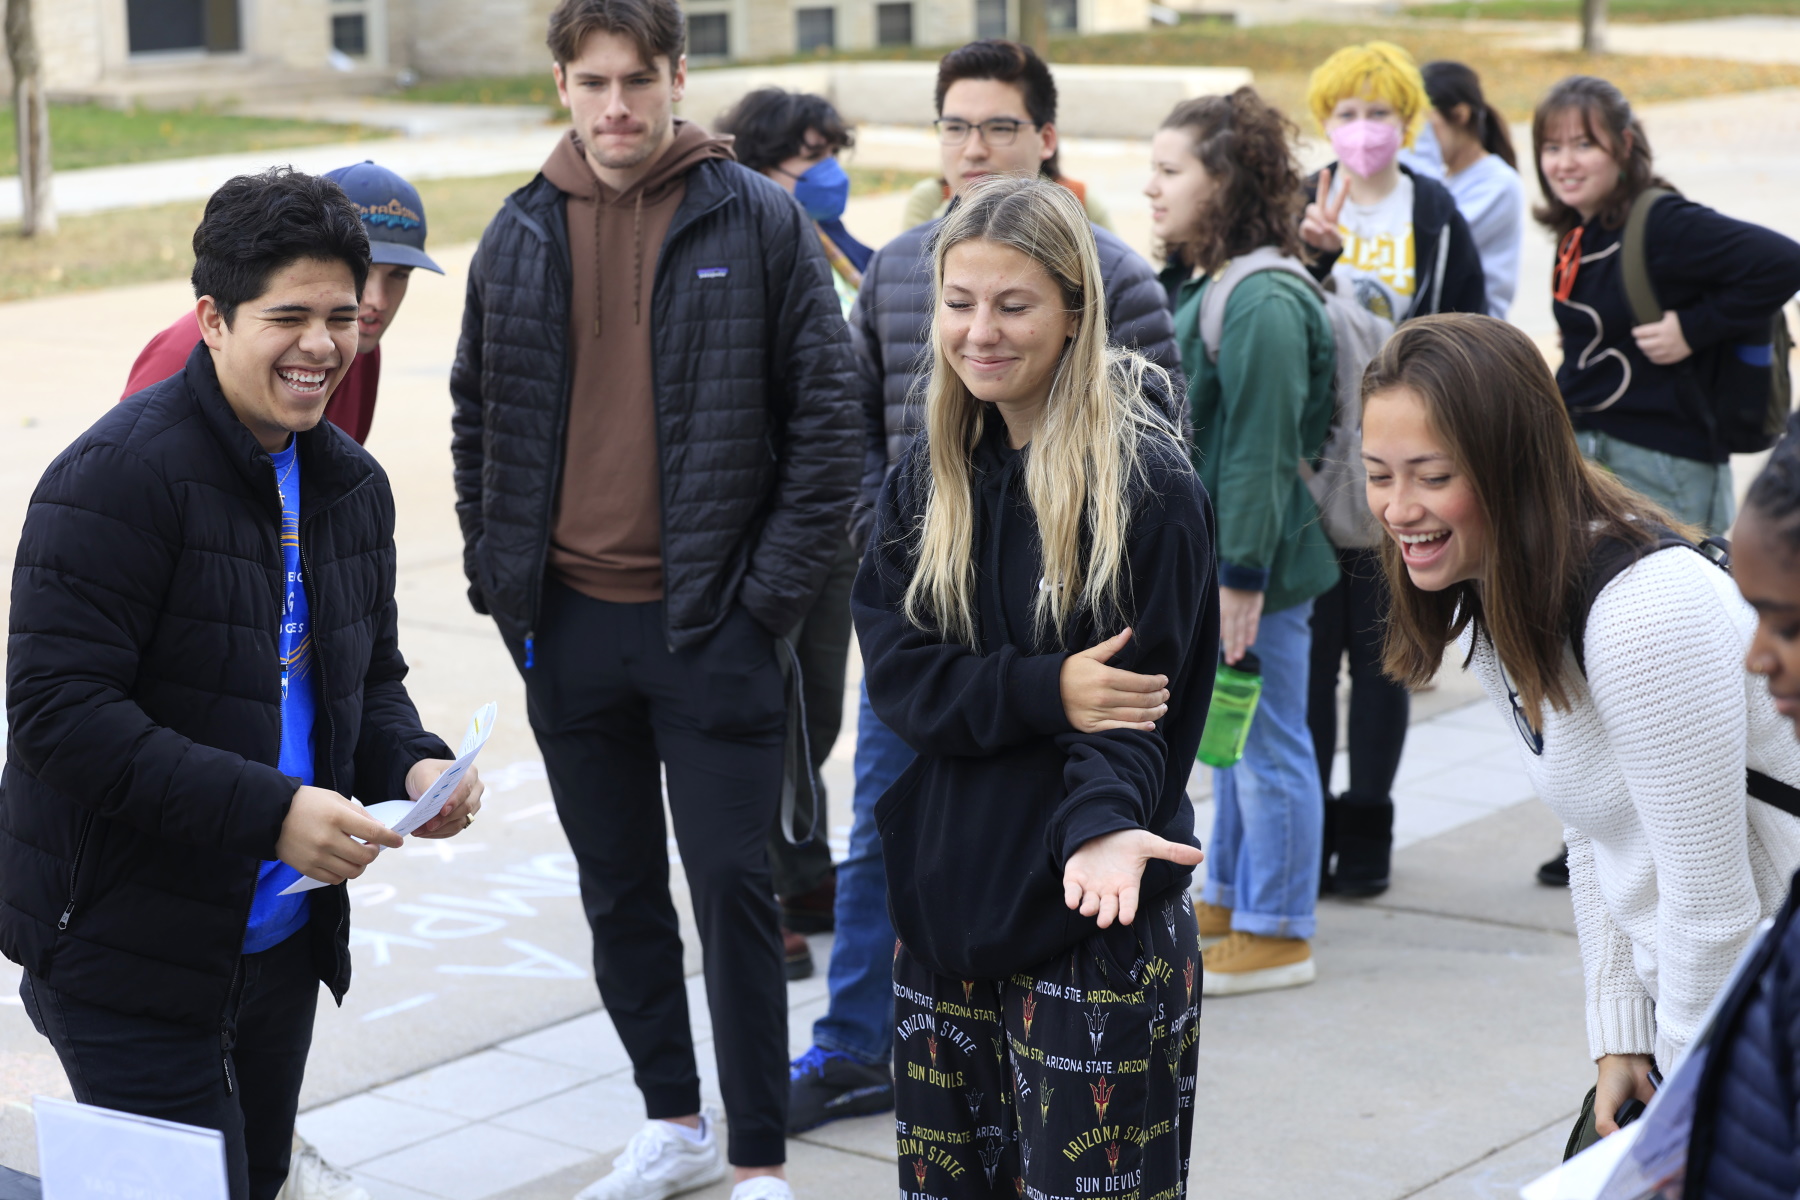 Students line up to play Spin the Wheel in front of Warch Campus Center.